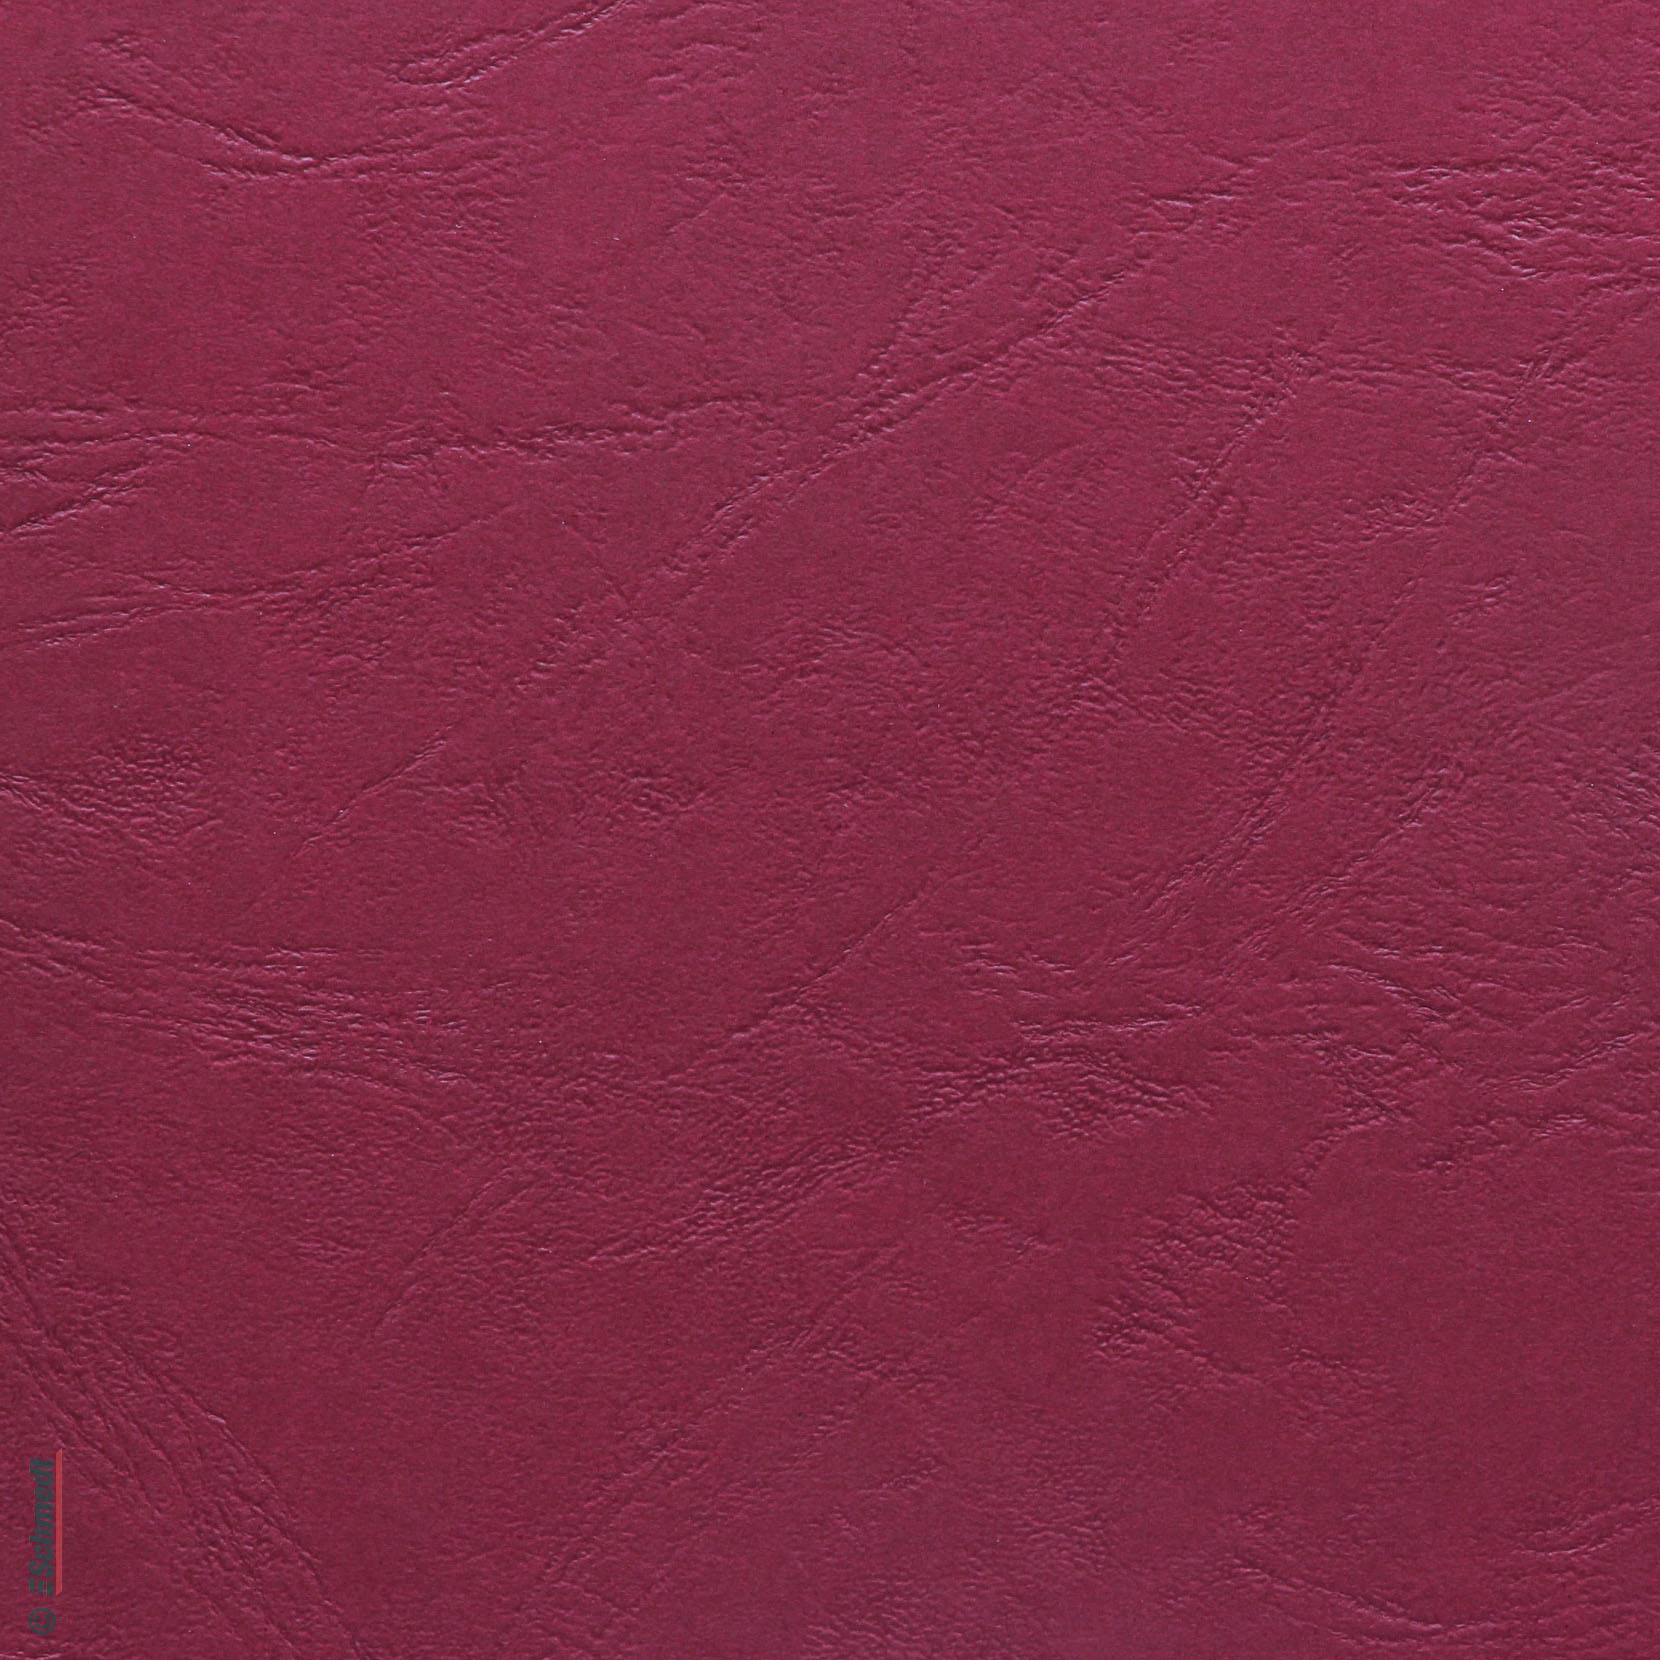 Cover board - leather emboss - Colour 425 - wine red - used as cover for books and brochures, for folders, model making, greeting cards or t...